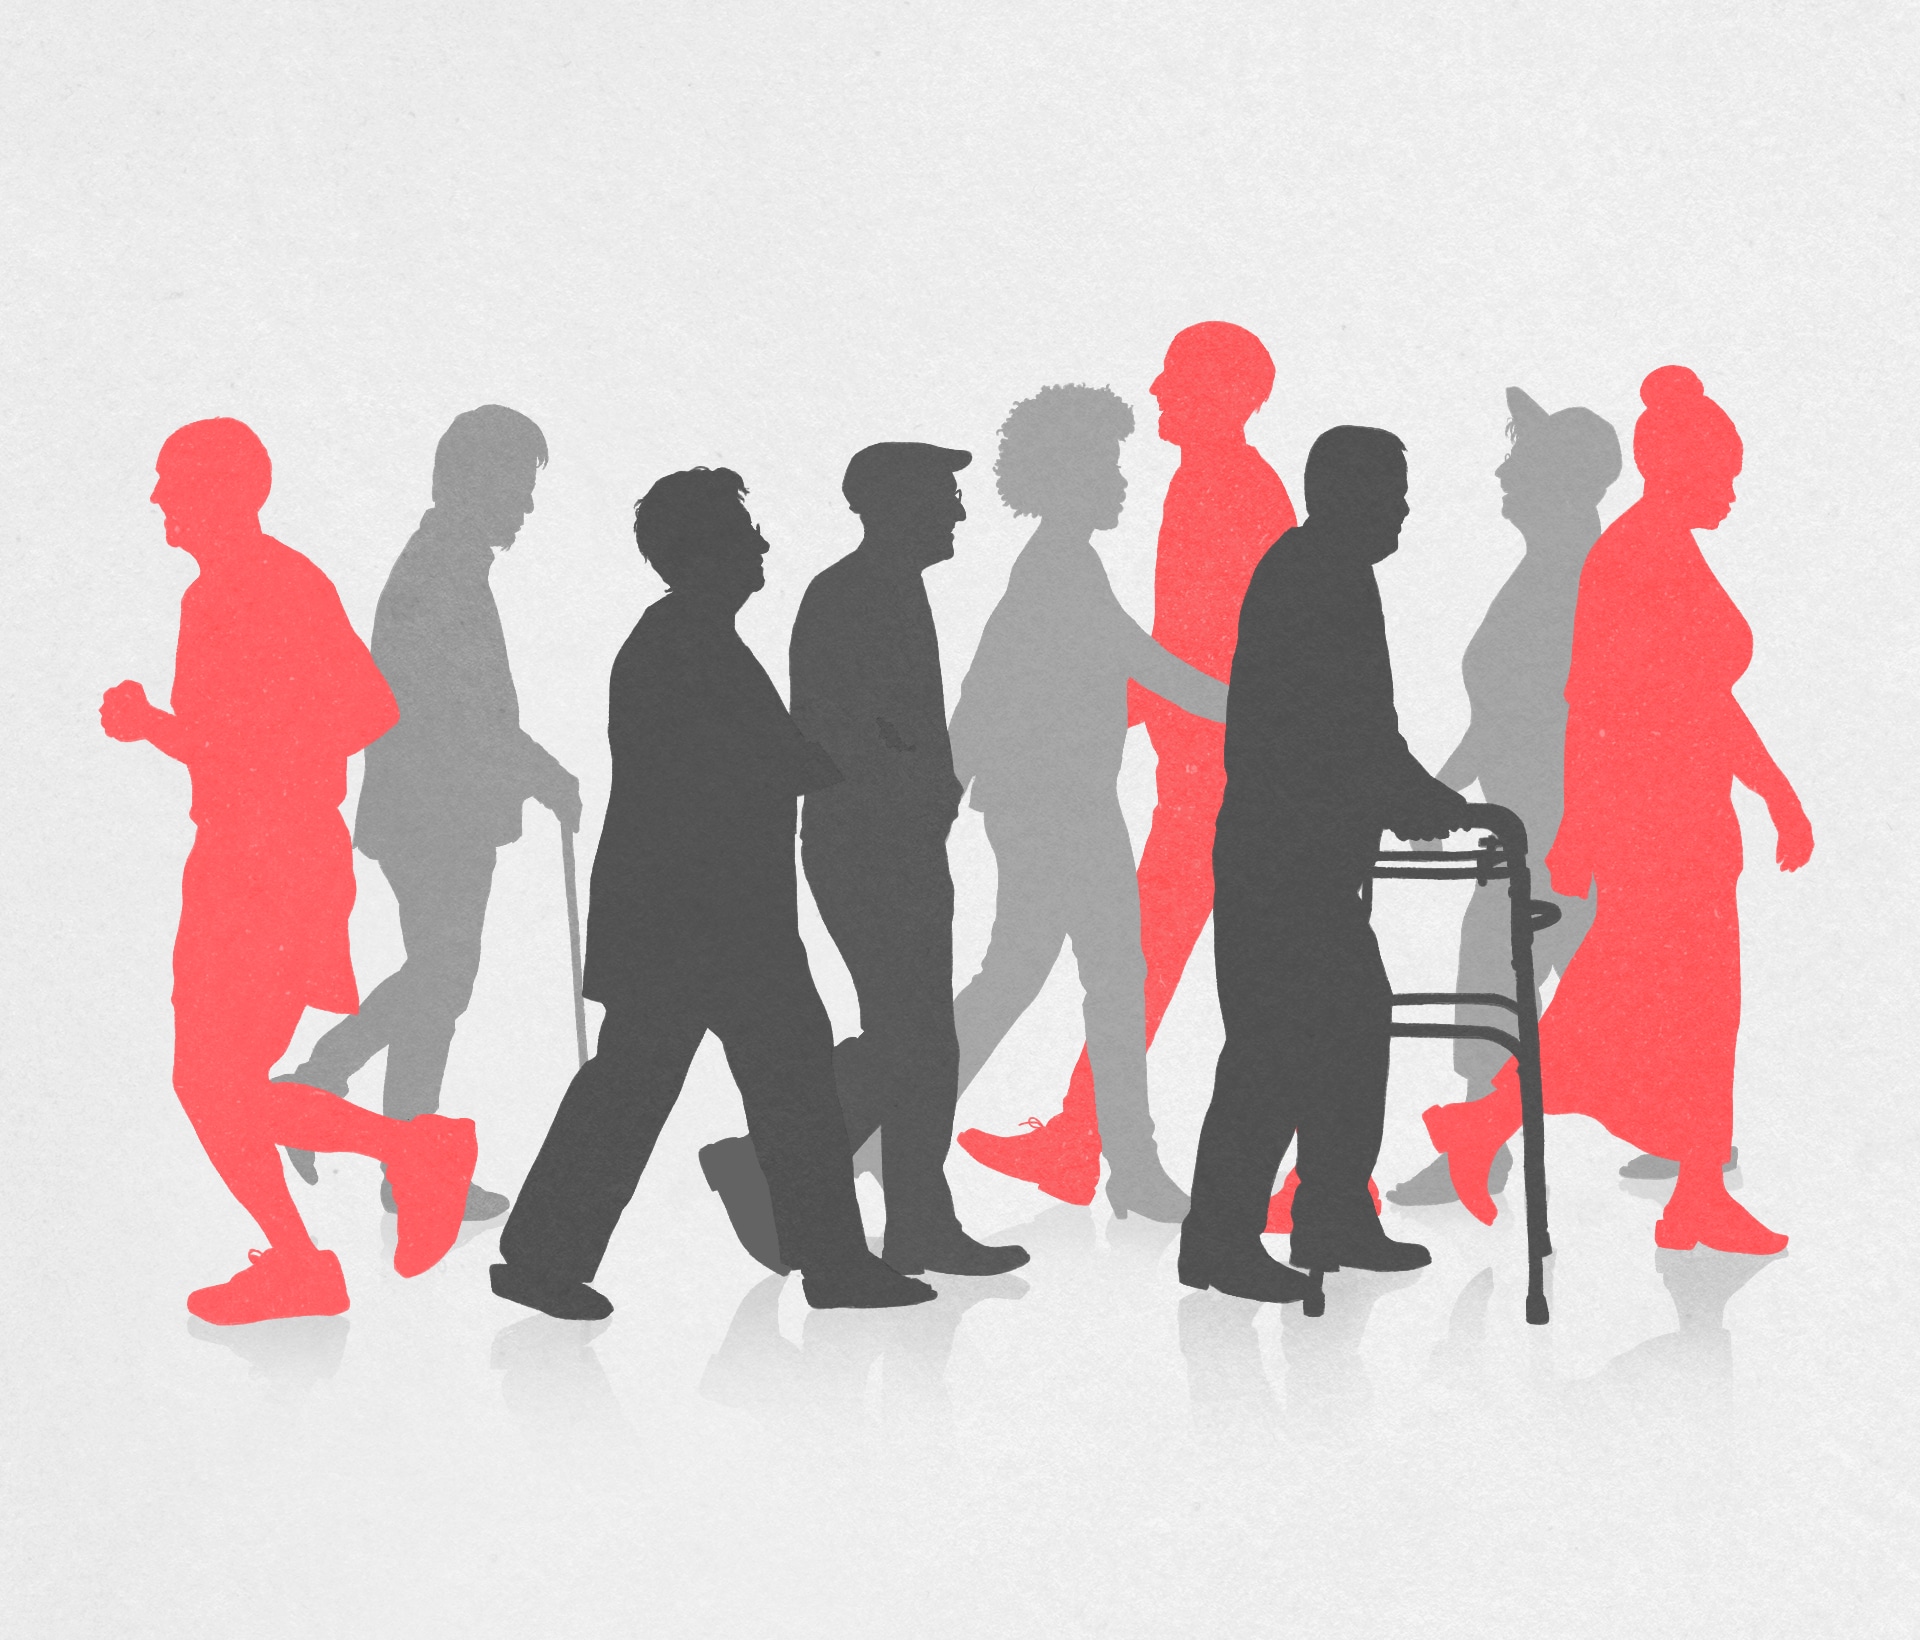 An image of silhouettes of elderly people with a few bright red and other darker grey.